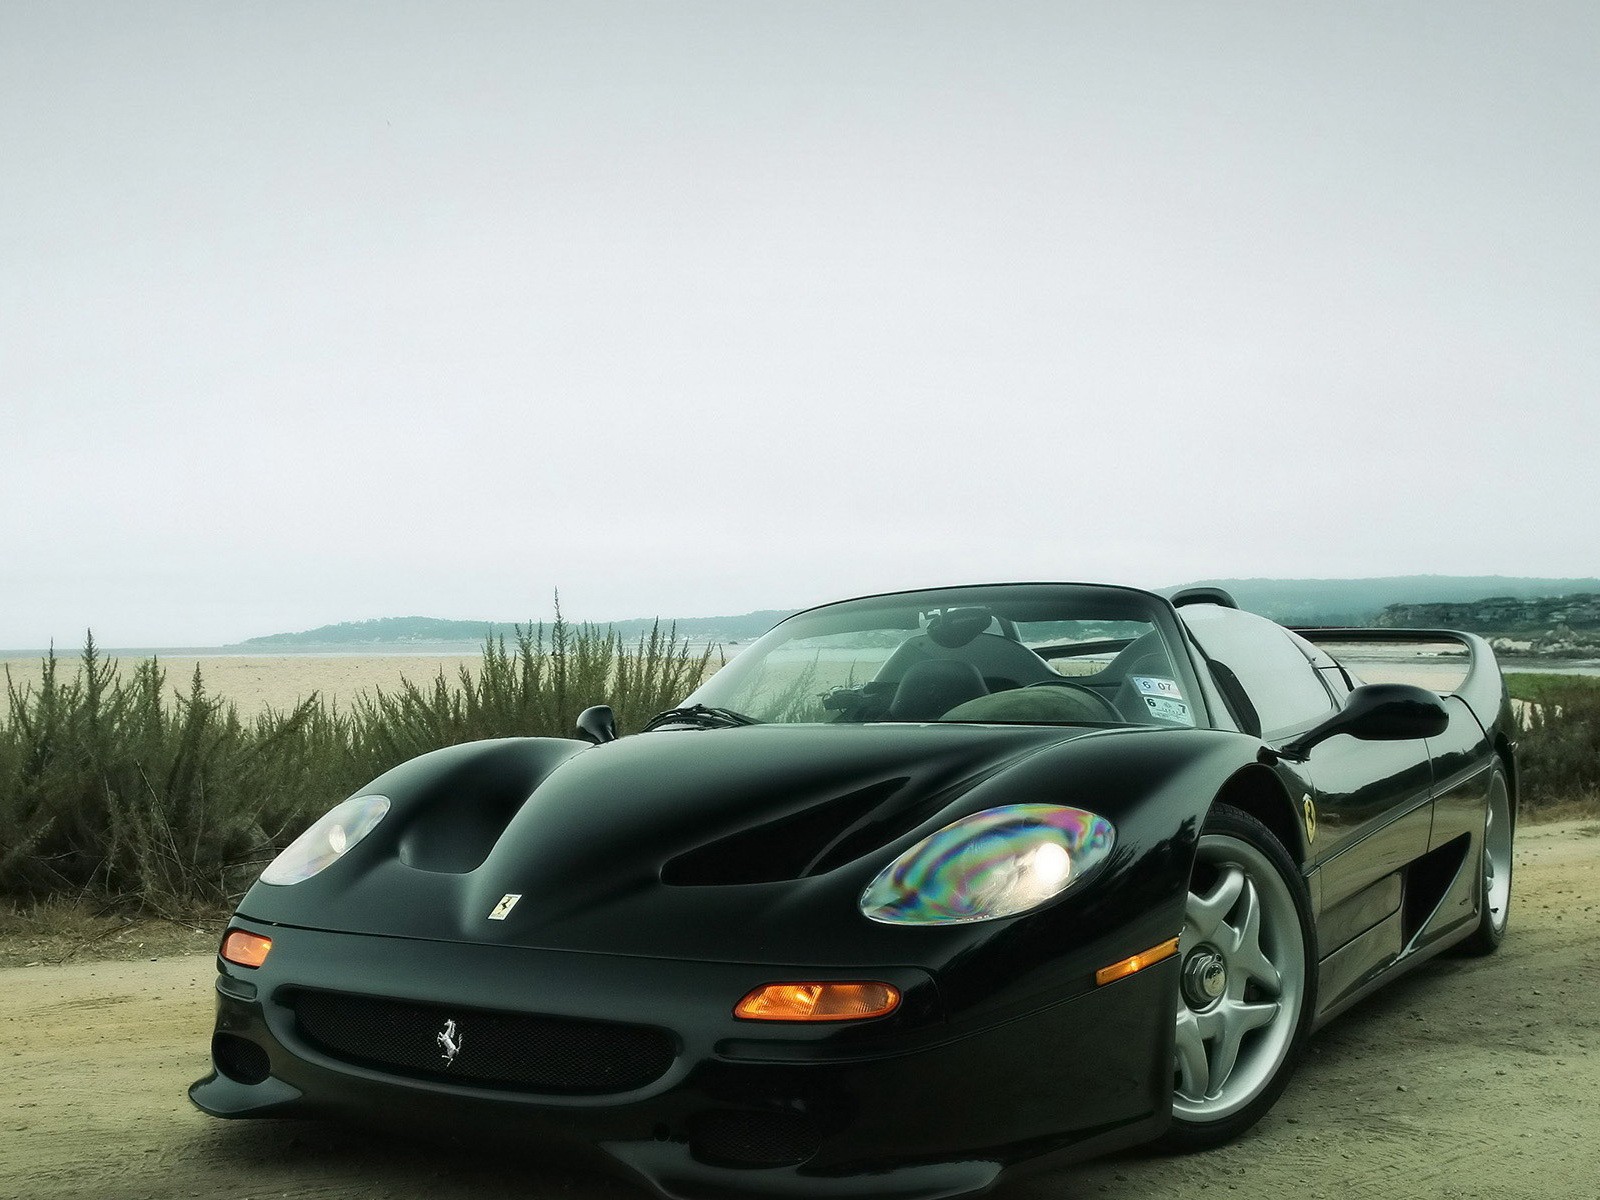 Ferrari convertible on the road wallpapers and images - wallpapers